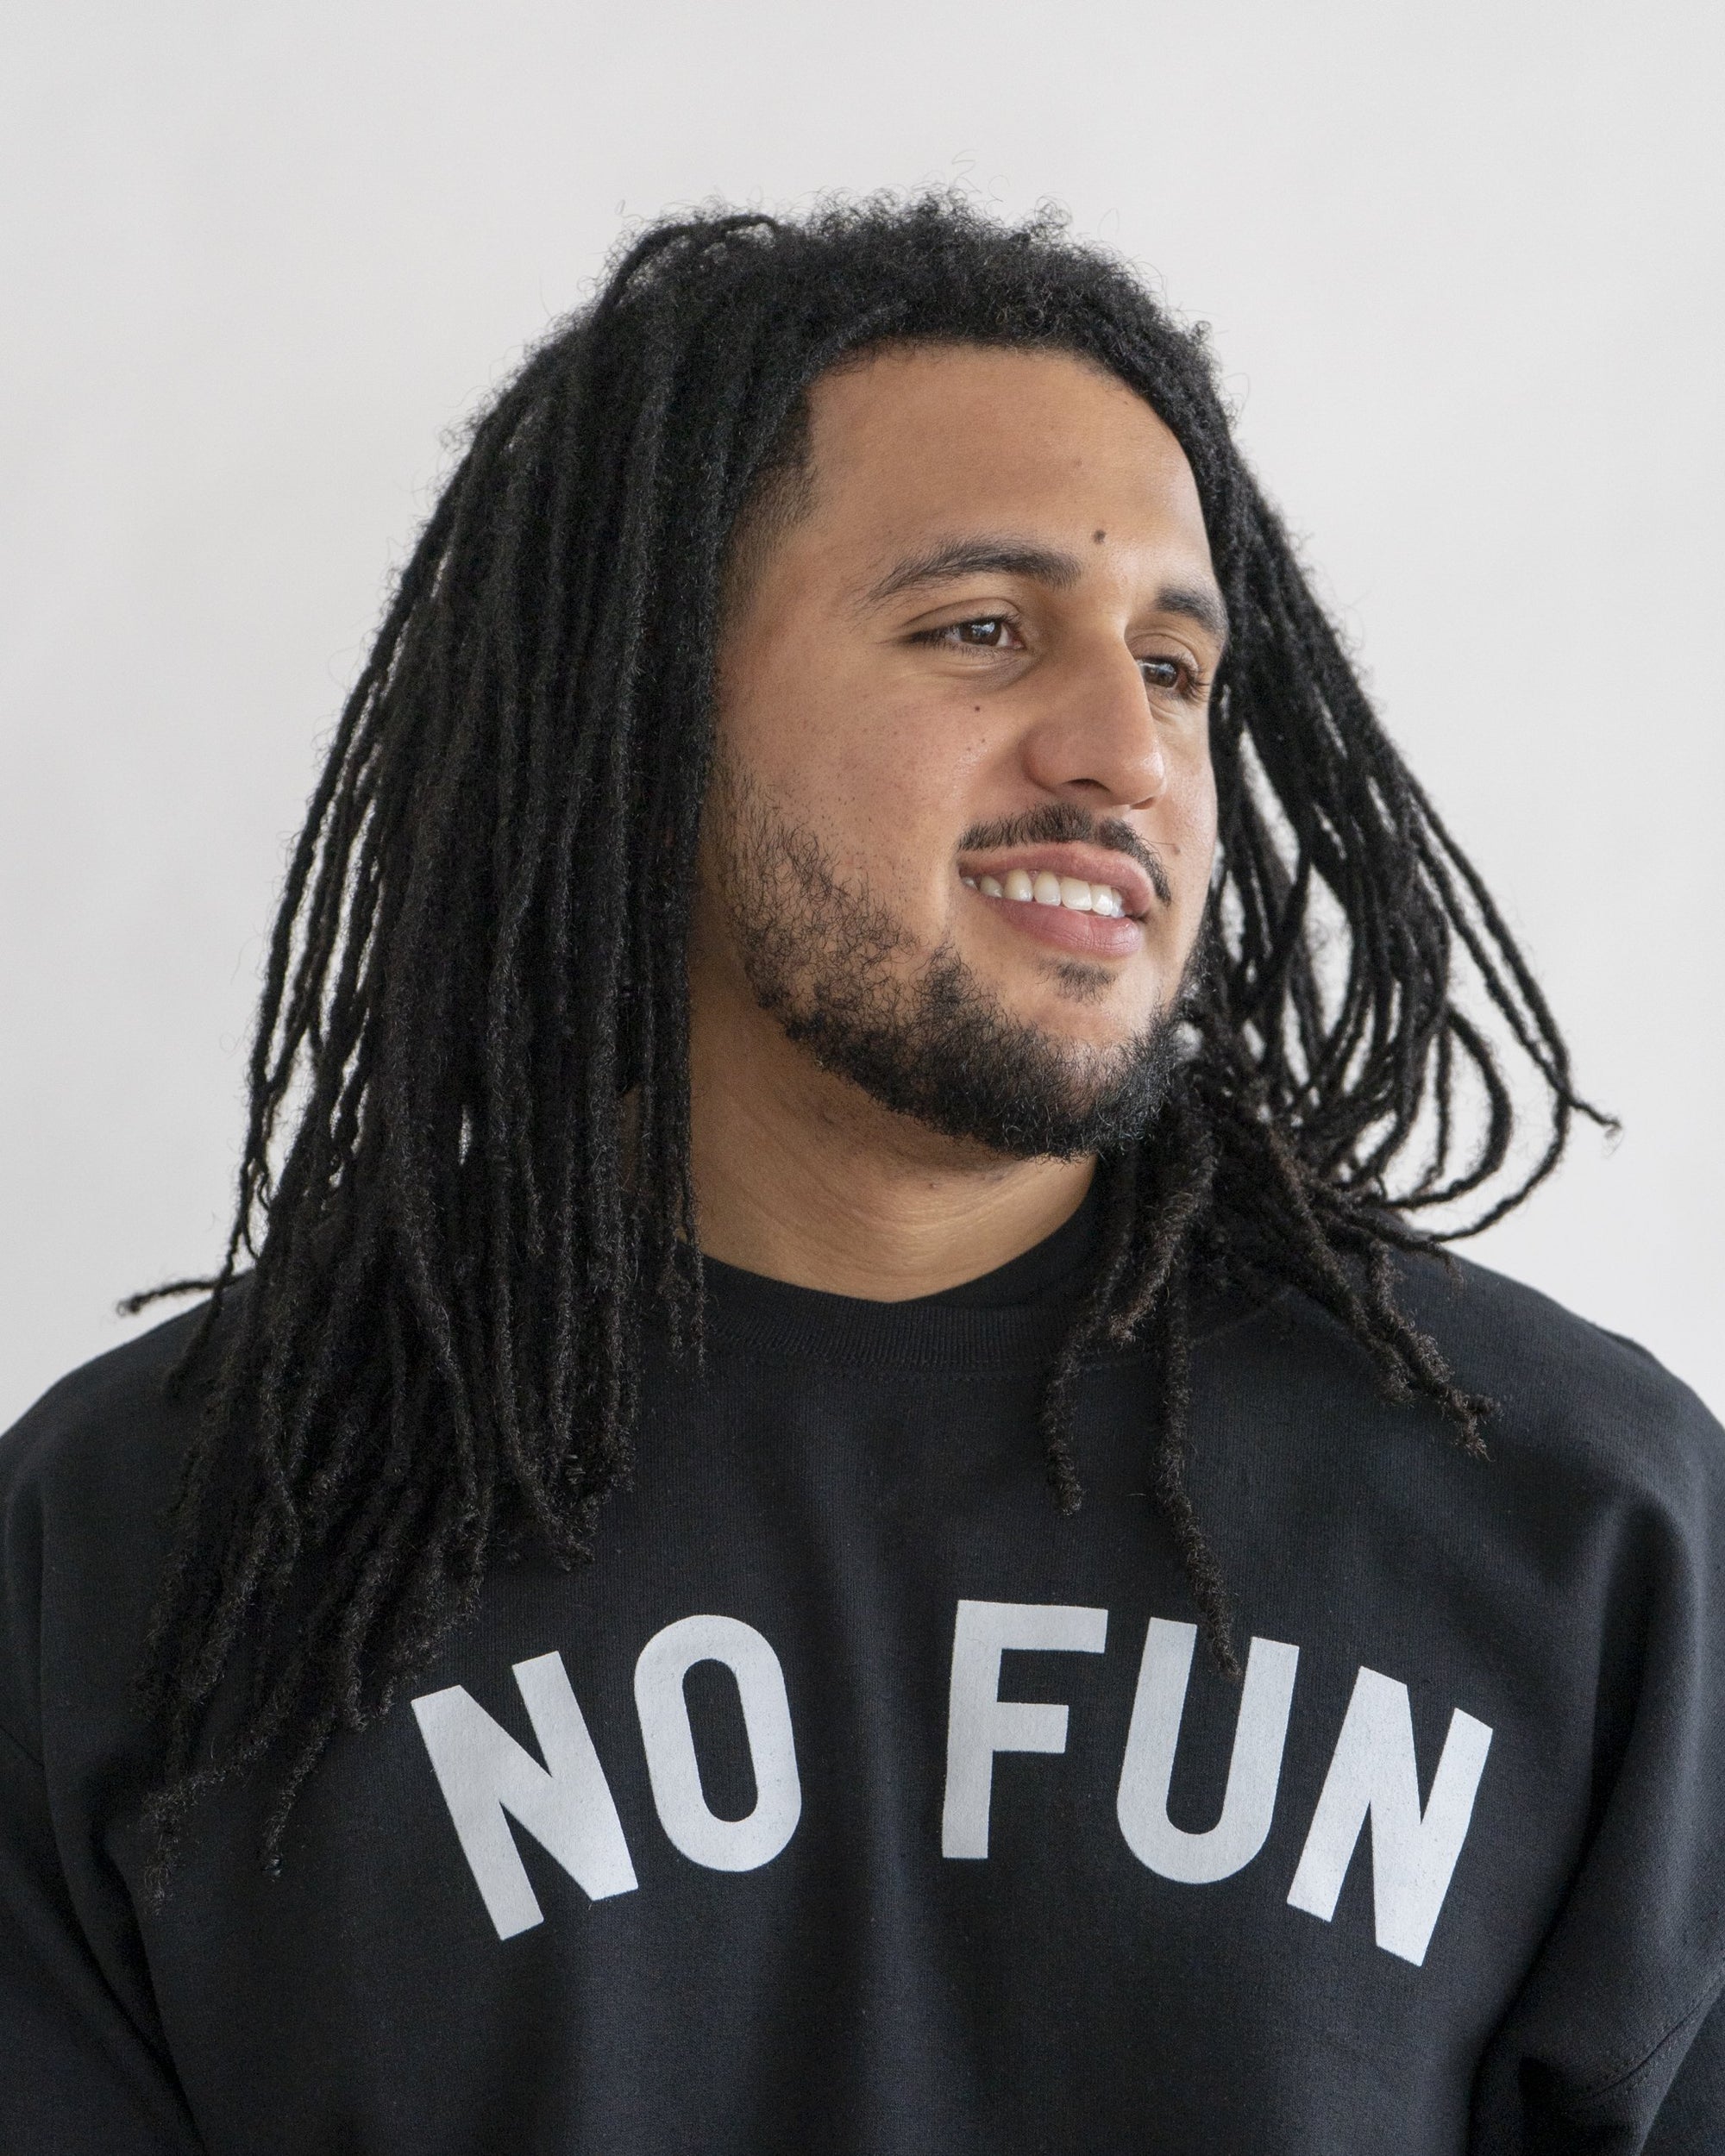 Amale model wearing the original "NO FUN®" logo crewneck sweater. The sweater is black and features large white text that reads "NO FUN®".